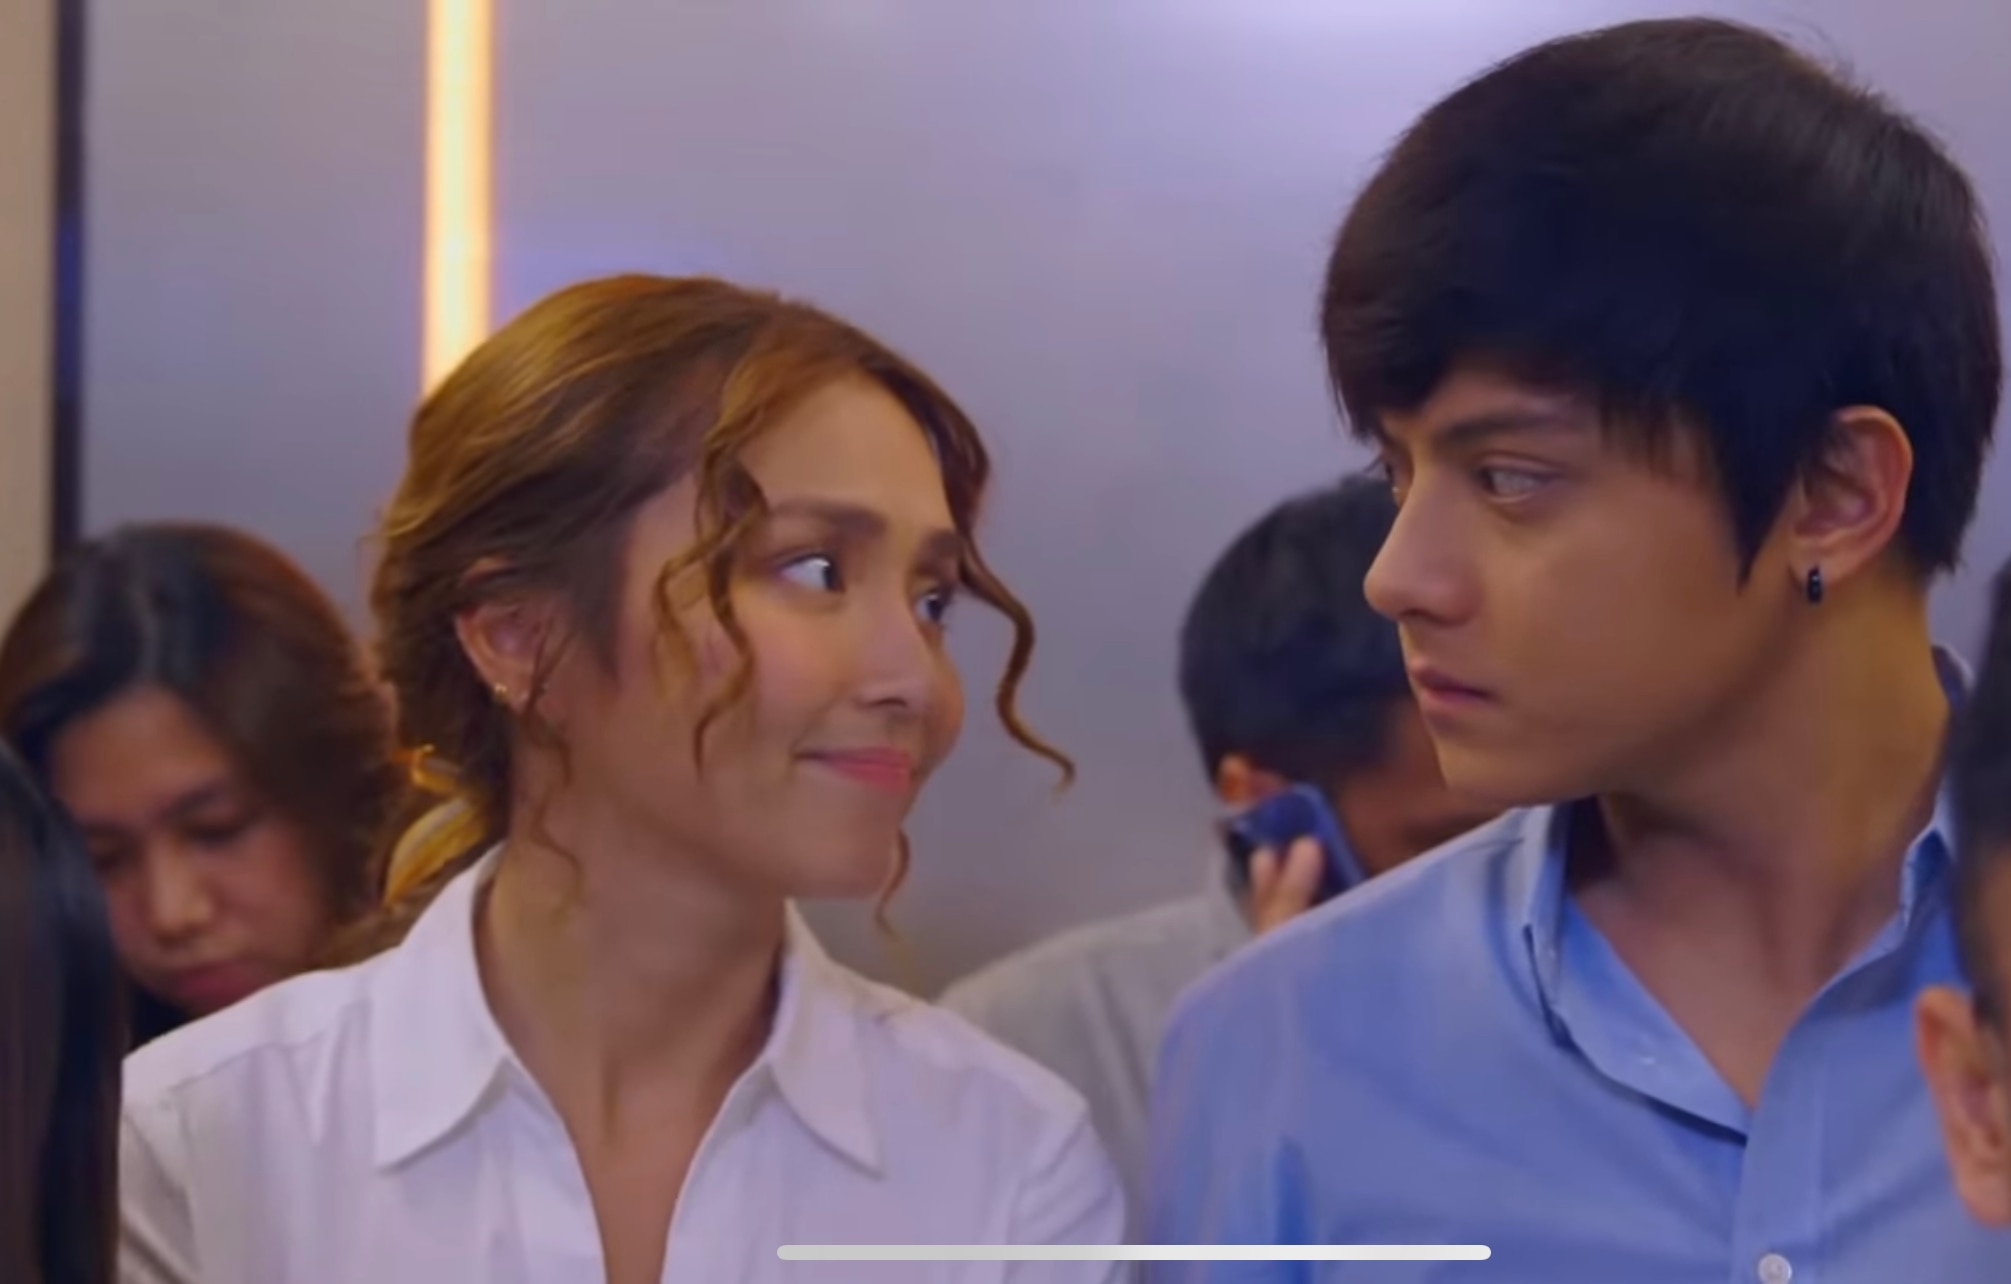 Daniel enters a new world with Kathryn in "2 Good 2 Be True"